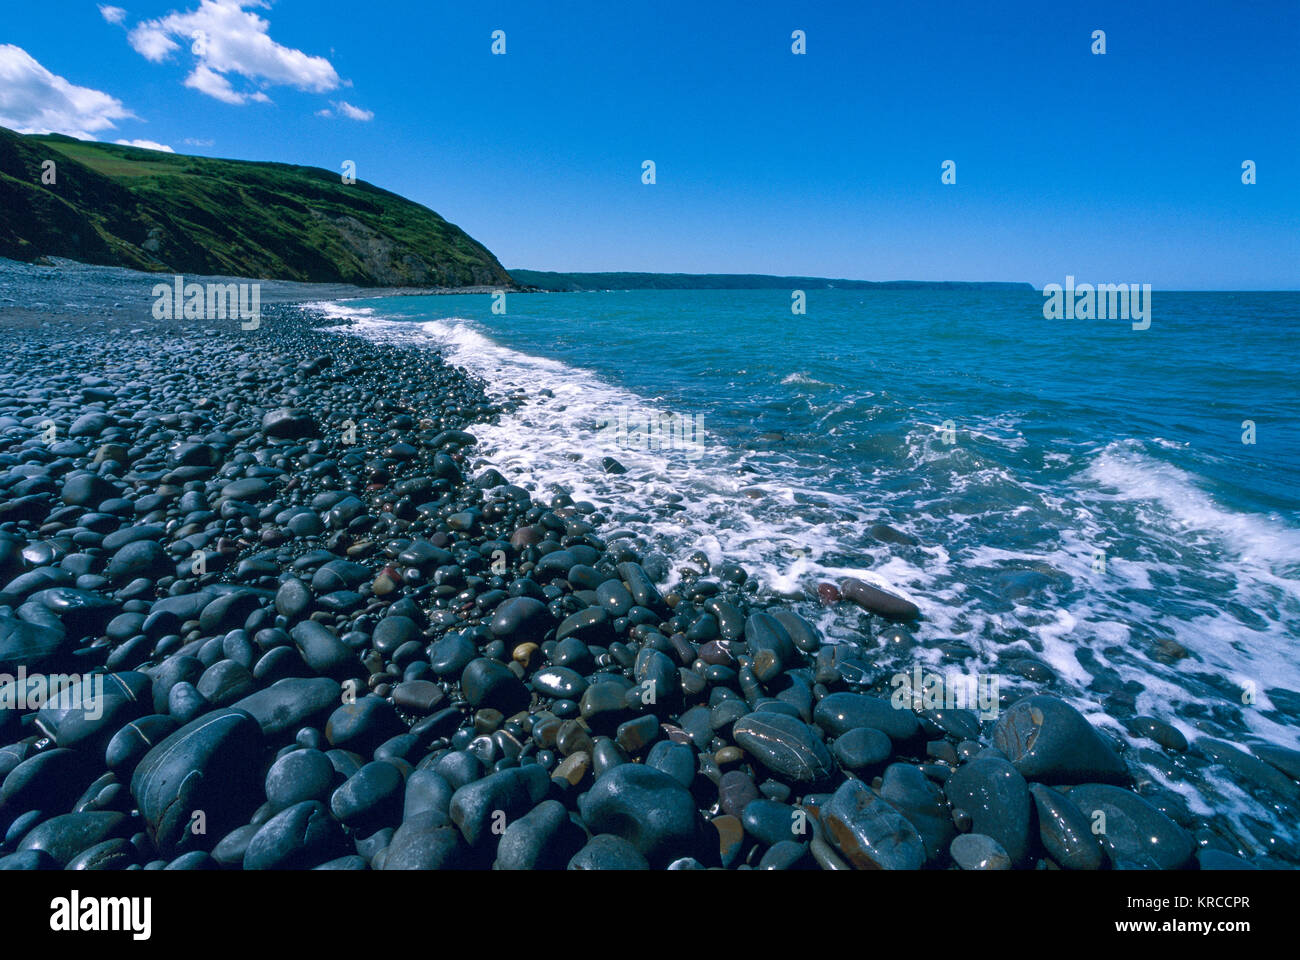 Greencliff Beach - Pebble View at Mid Tide, Looking South West towards Bucks Mills, Devon, UK. Stock Photo